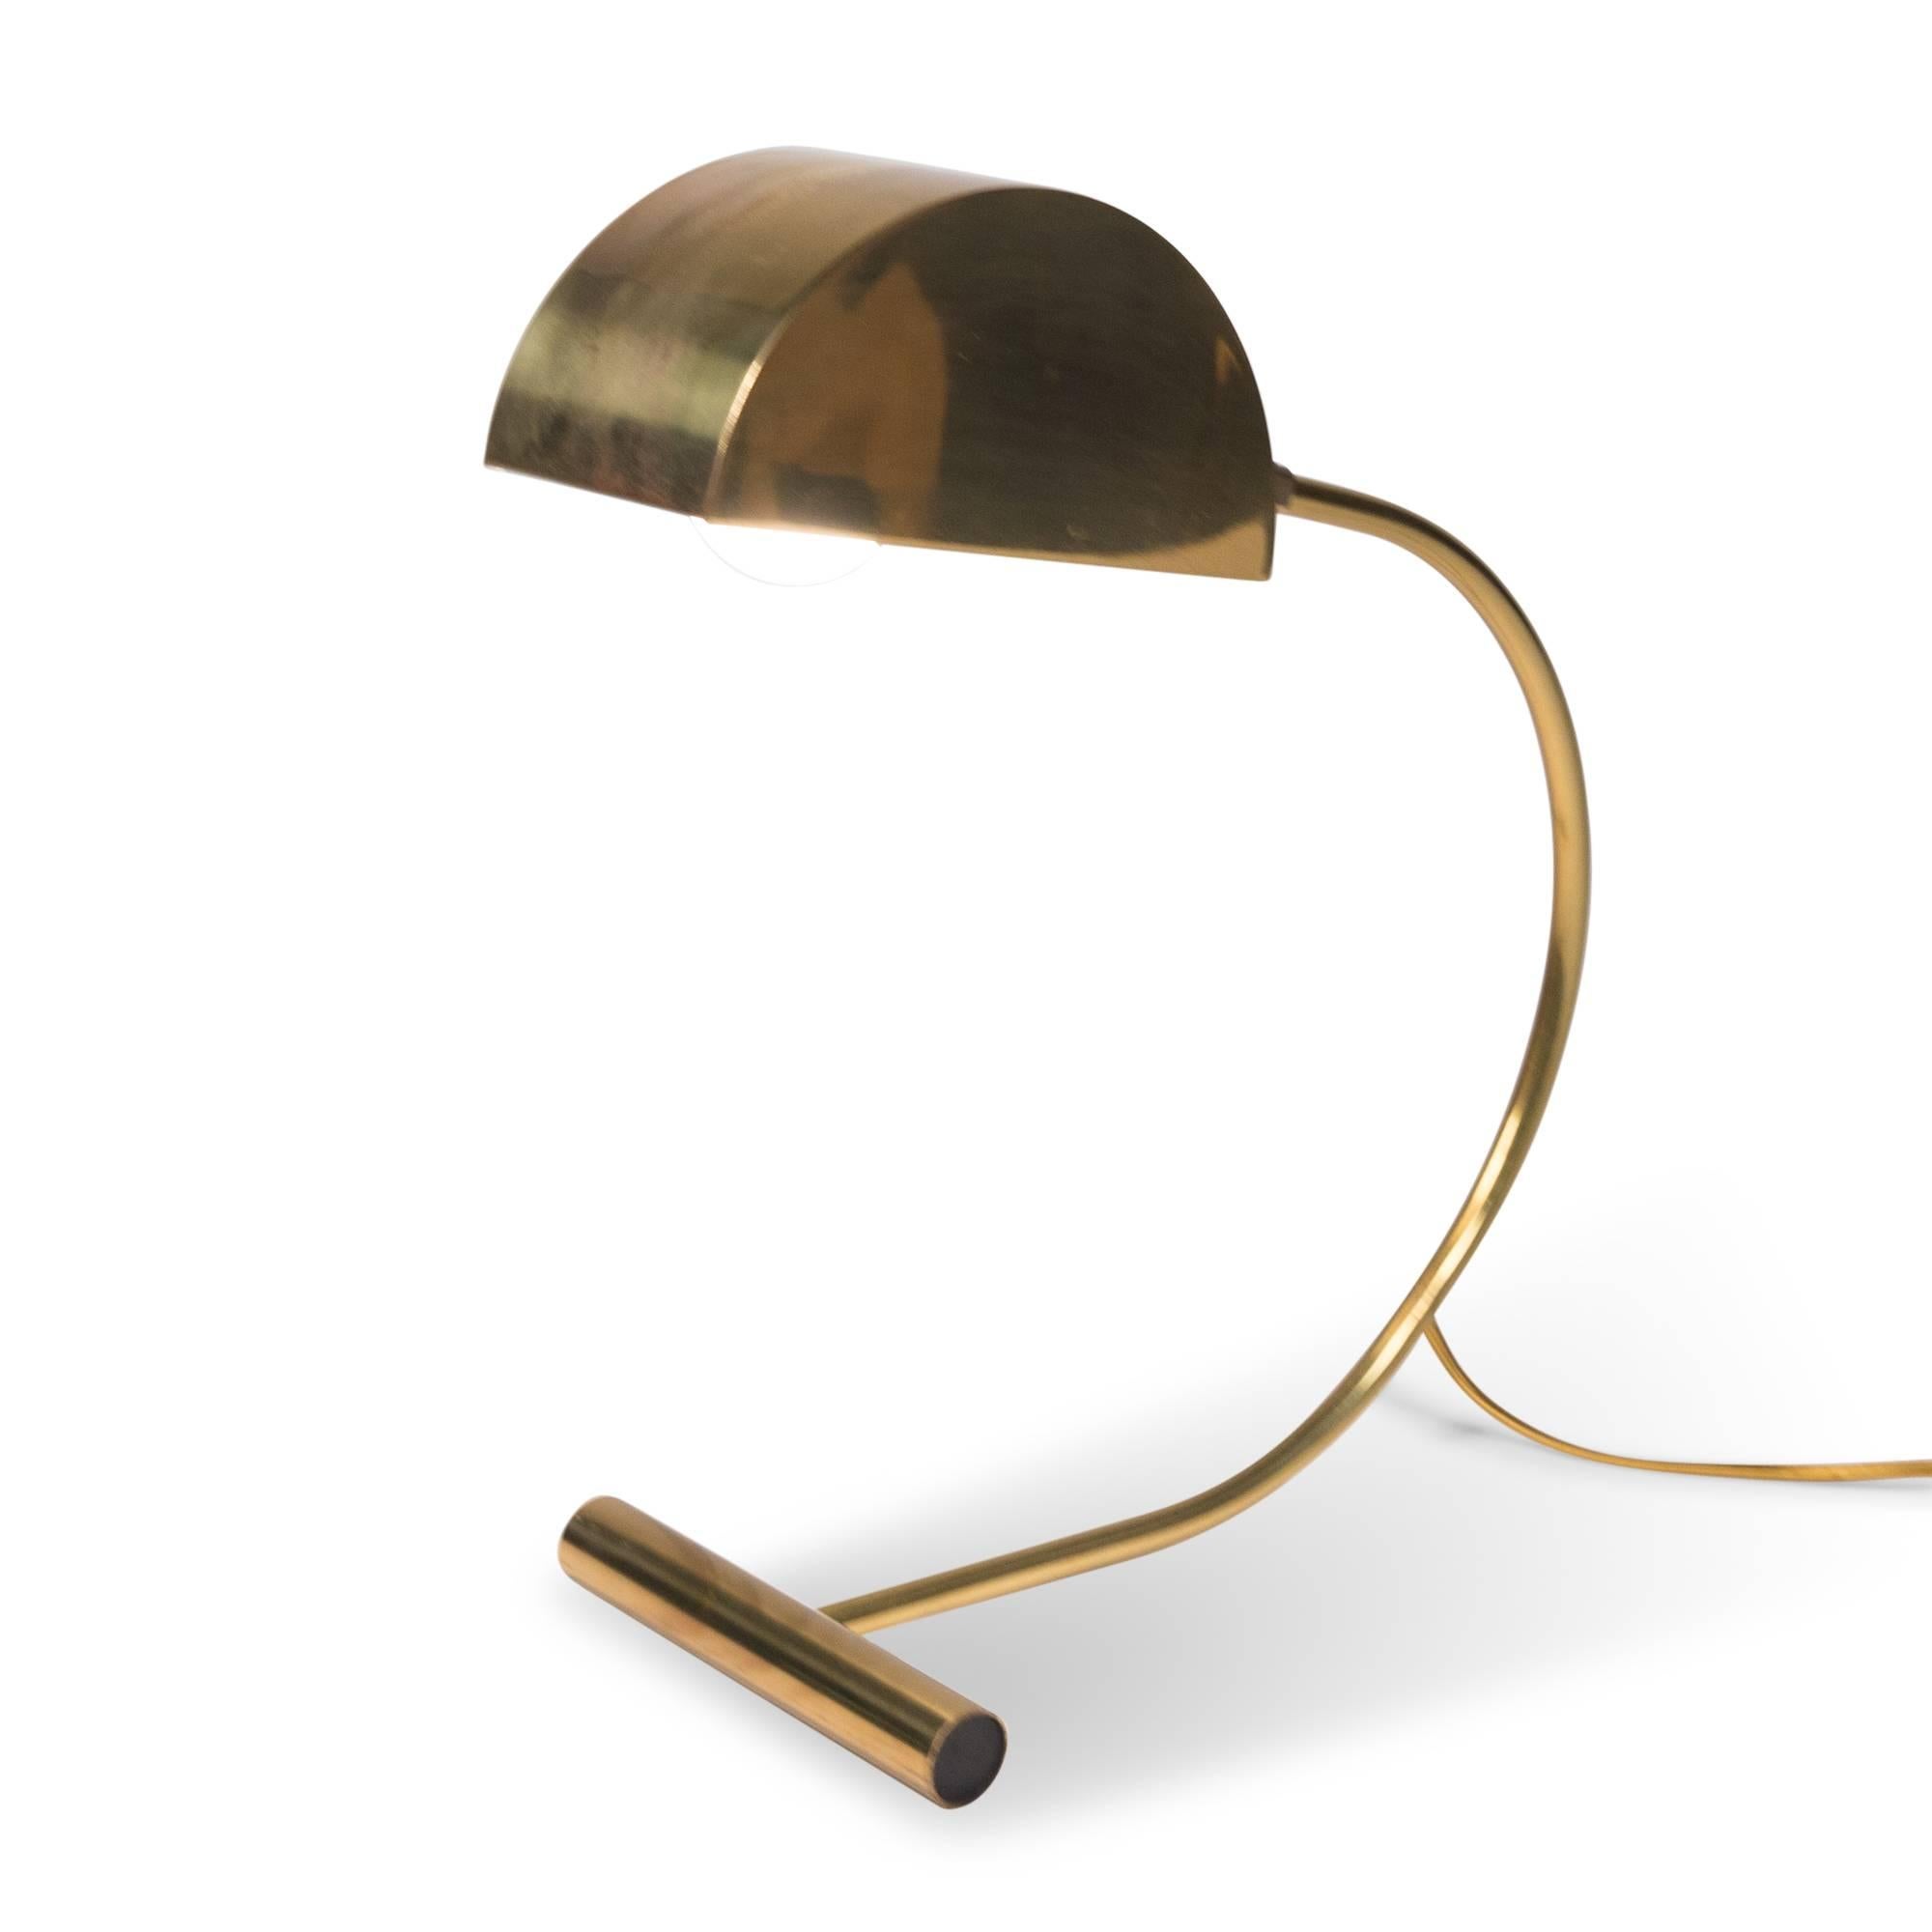 Polished brass desk lamp, the adjustable semi-circular shade mounted on a arced base terminating in a cross support, United States, 1960s. Measure: Height 14 in, depth 14 in, width 5 in.